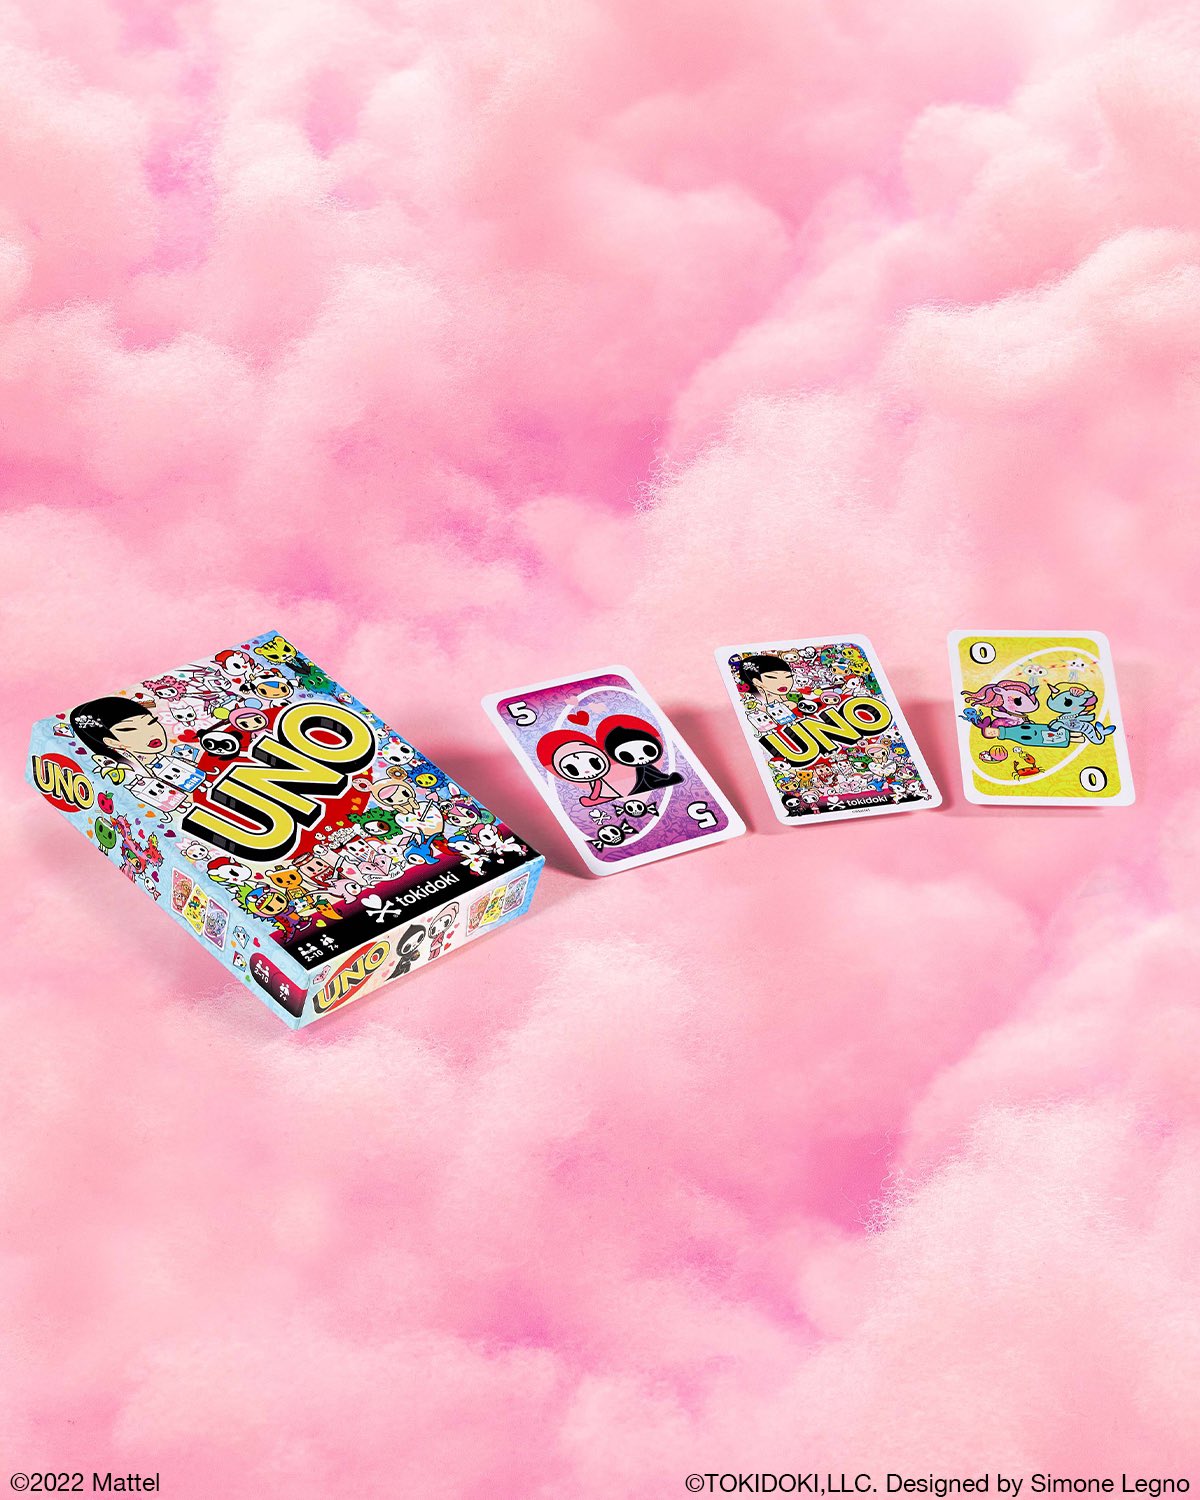 UNO're spreading the love with This deck features tokidoki characters + a unique Wild Sweetheart Shield card that “protects your heart” by allowing you to block Draw Two